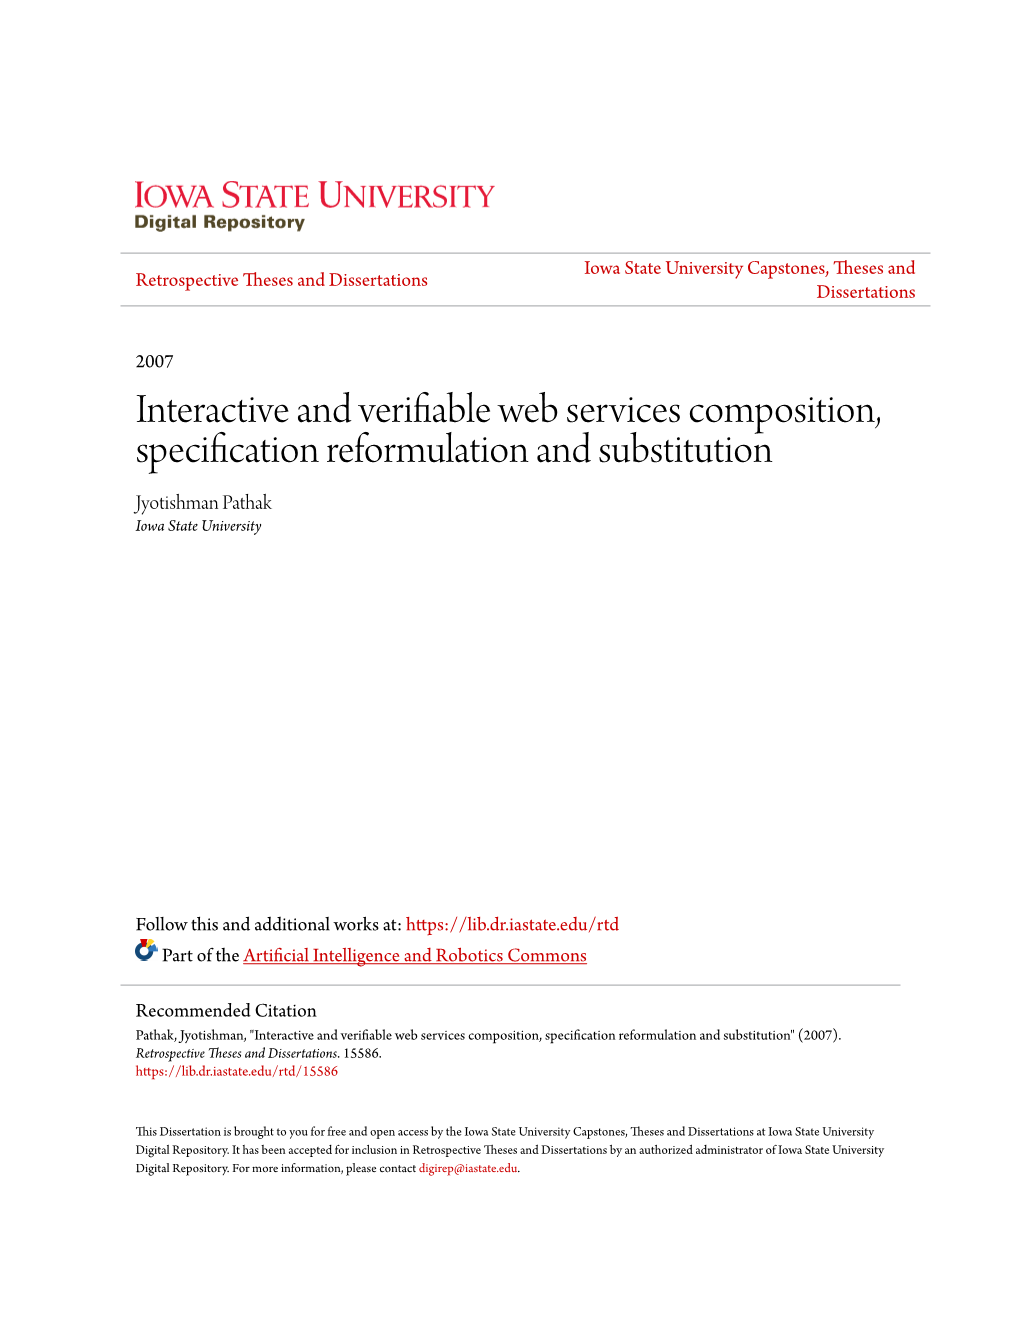 Interactive and Verifiable Web Services Composition, Specification Reformulation and Substitution Jyotishman Pathak Iowa State University